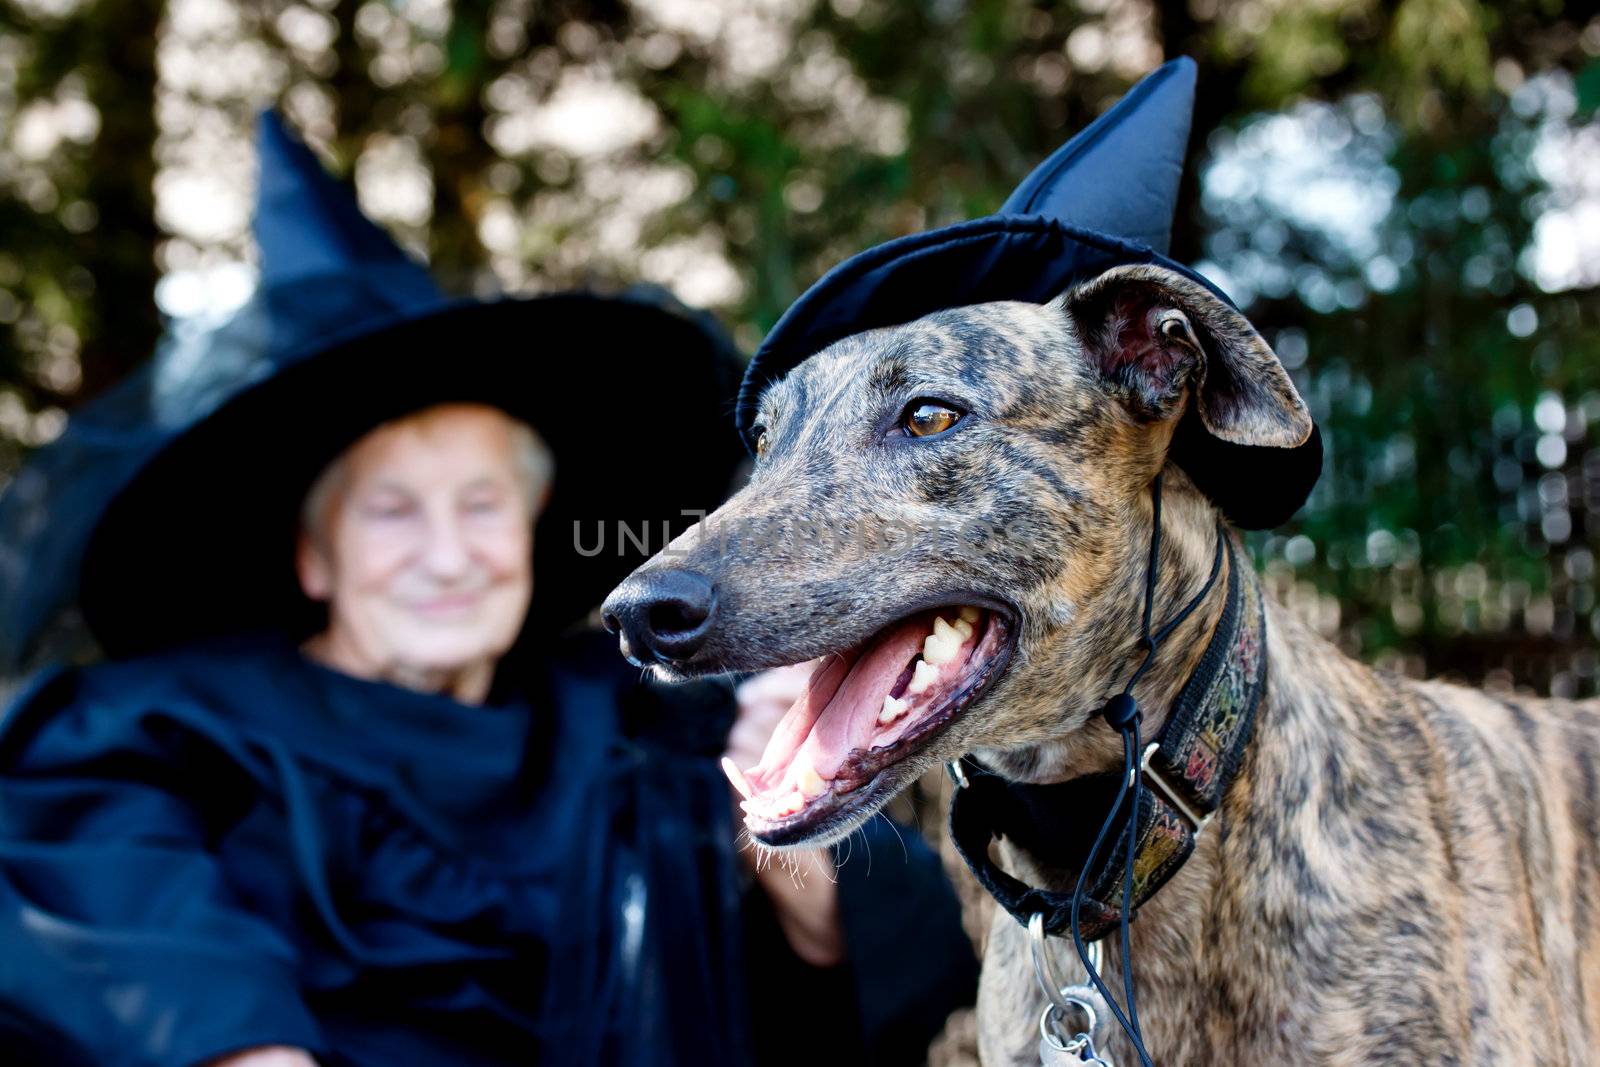 Dog and Senior in witch costume by melpomene